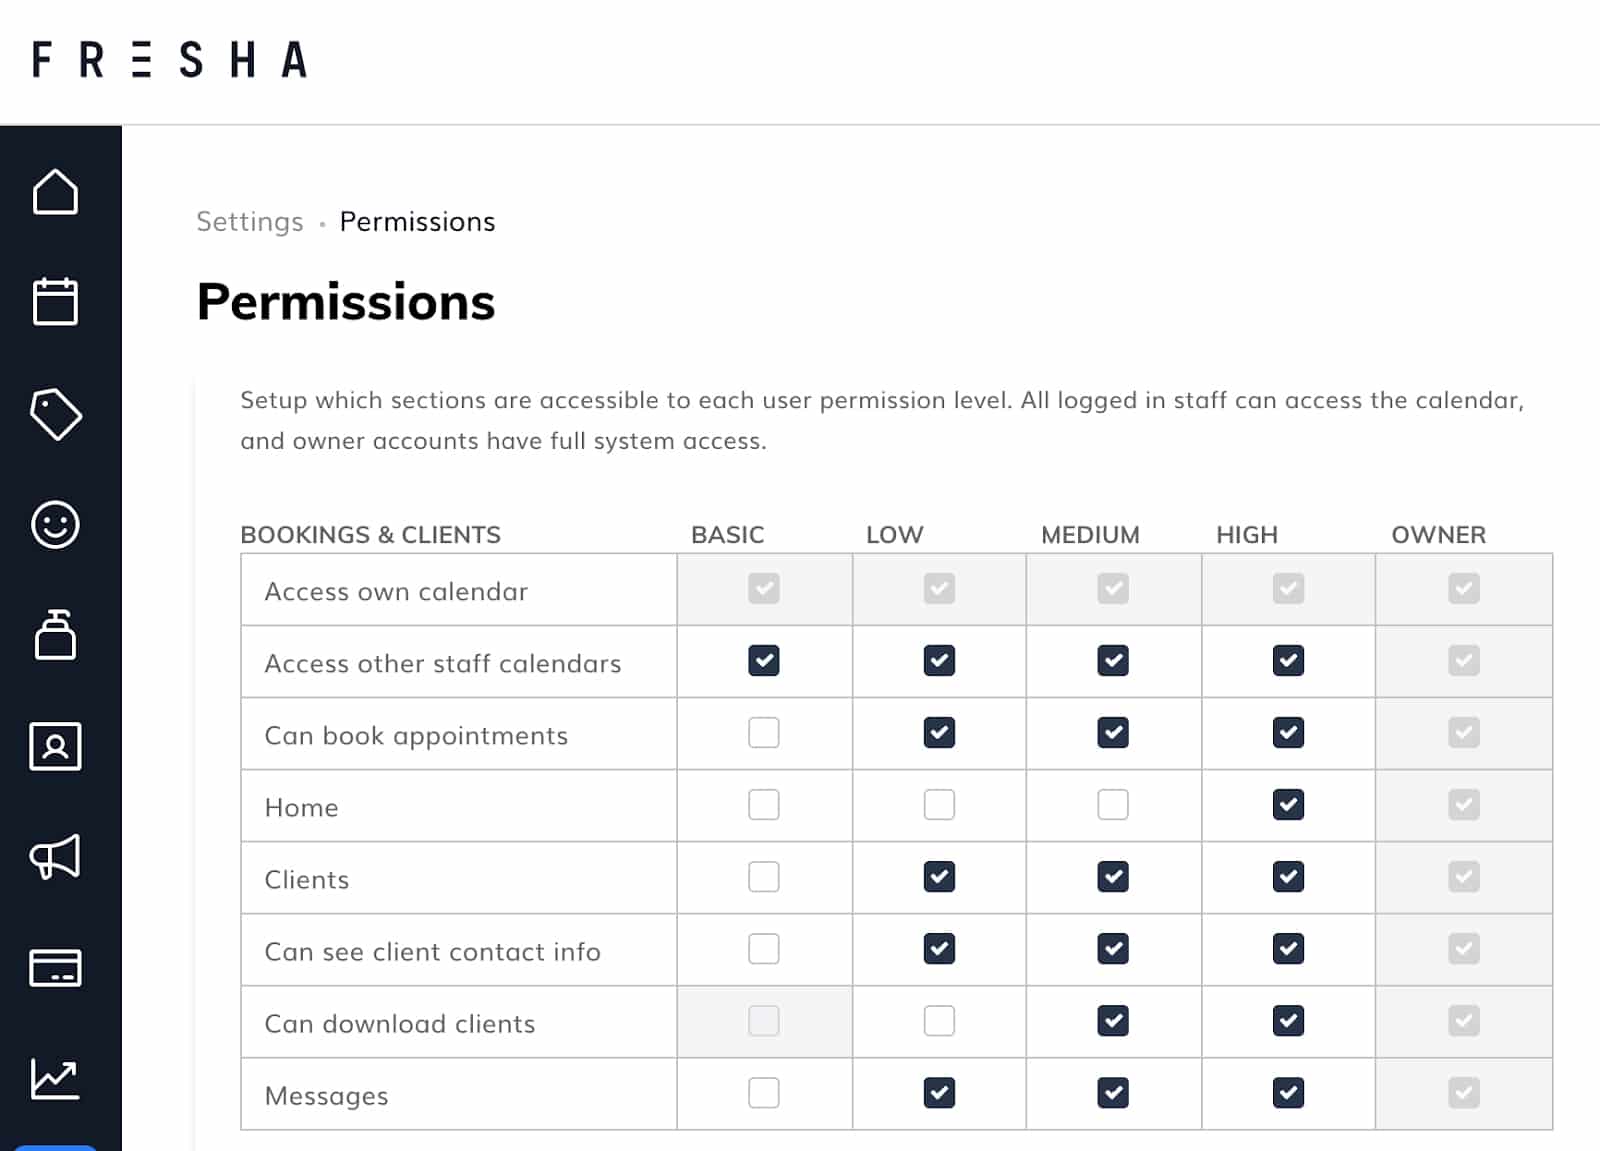 Fresha permission settings for which sections are accessible to each user.